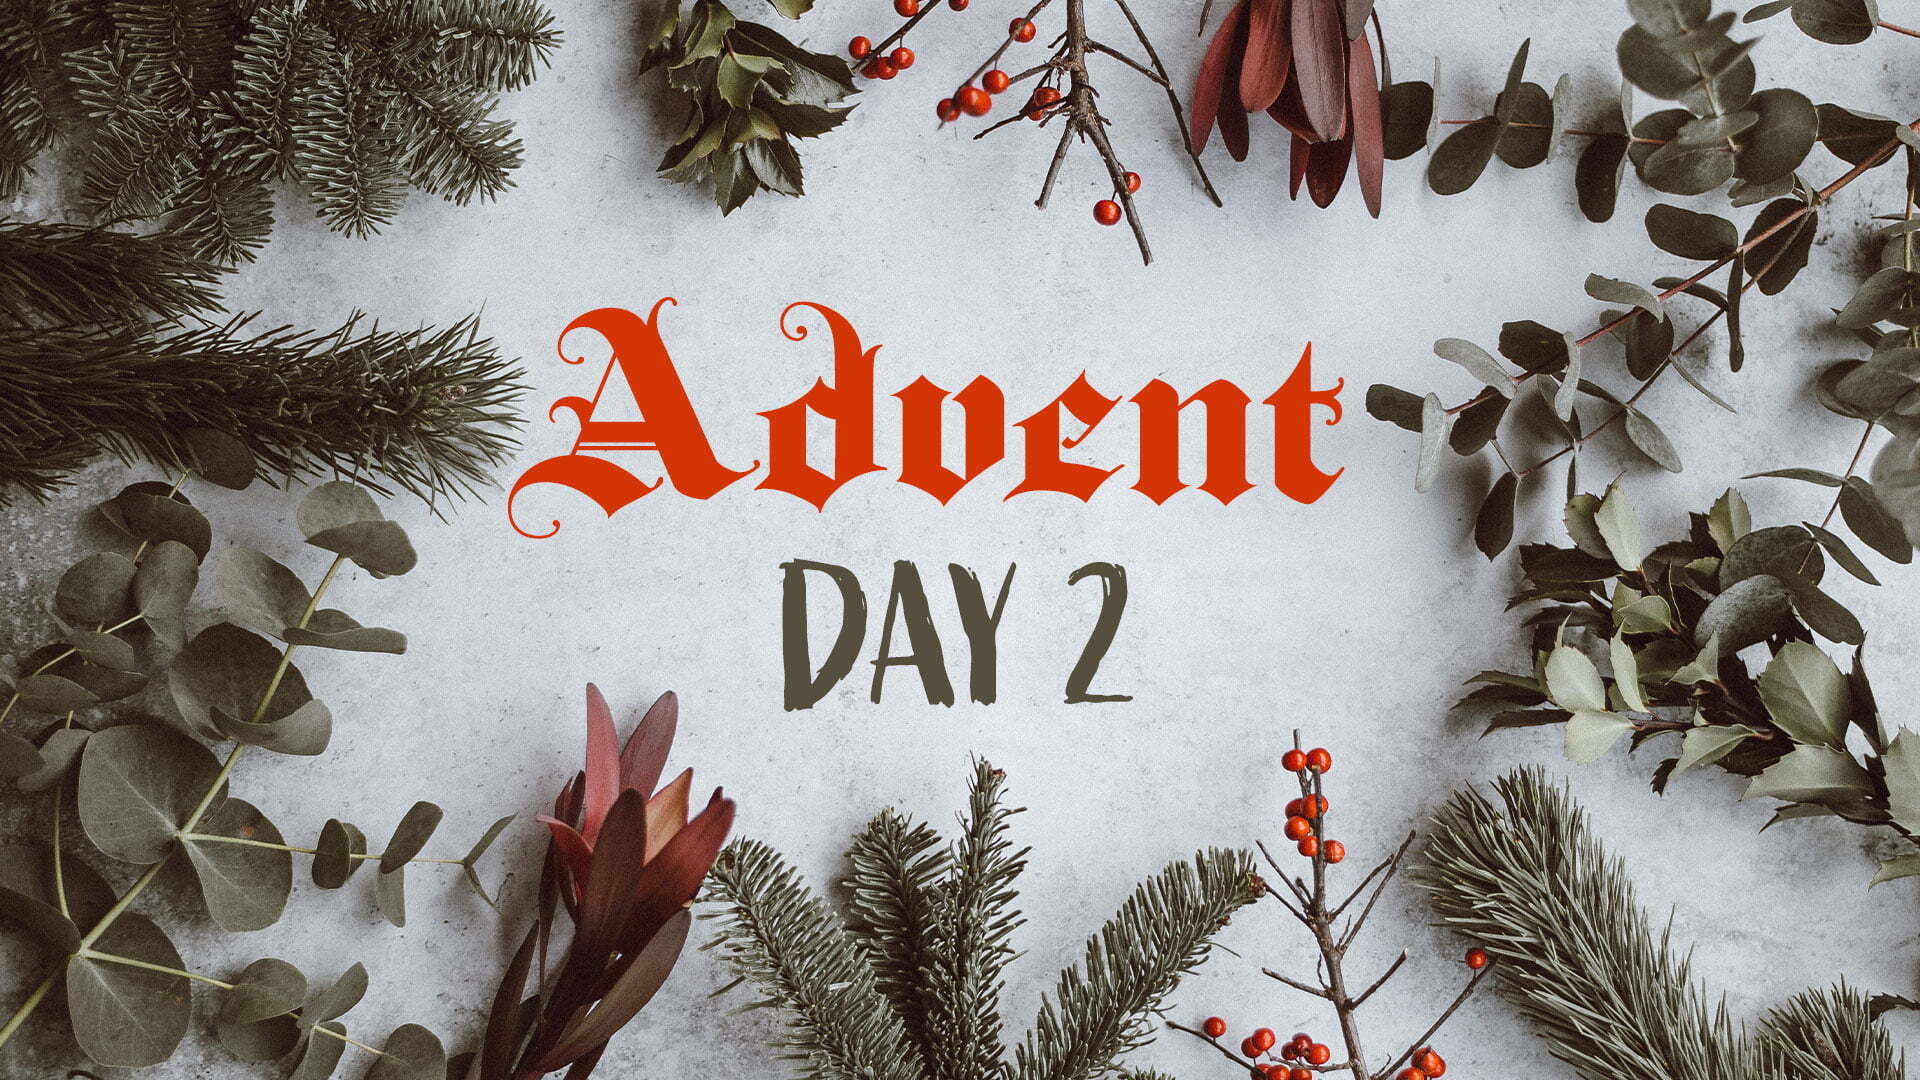 hillside-church-article-img-advent-day-2